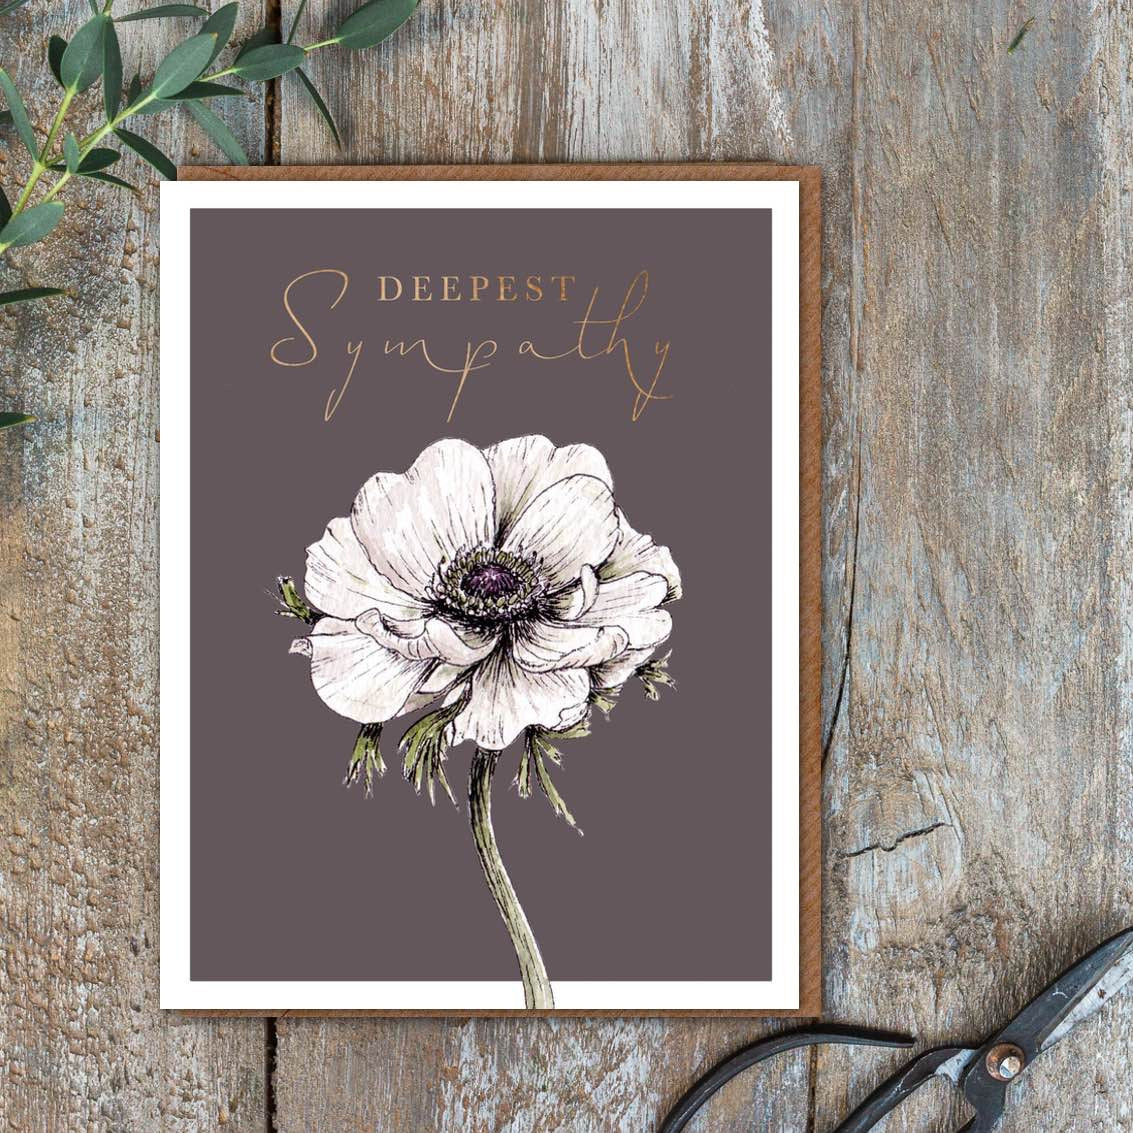 Toasted Crumpet - Deepest Sympathy Card